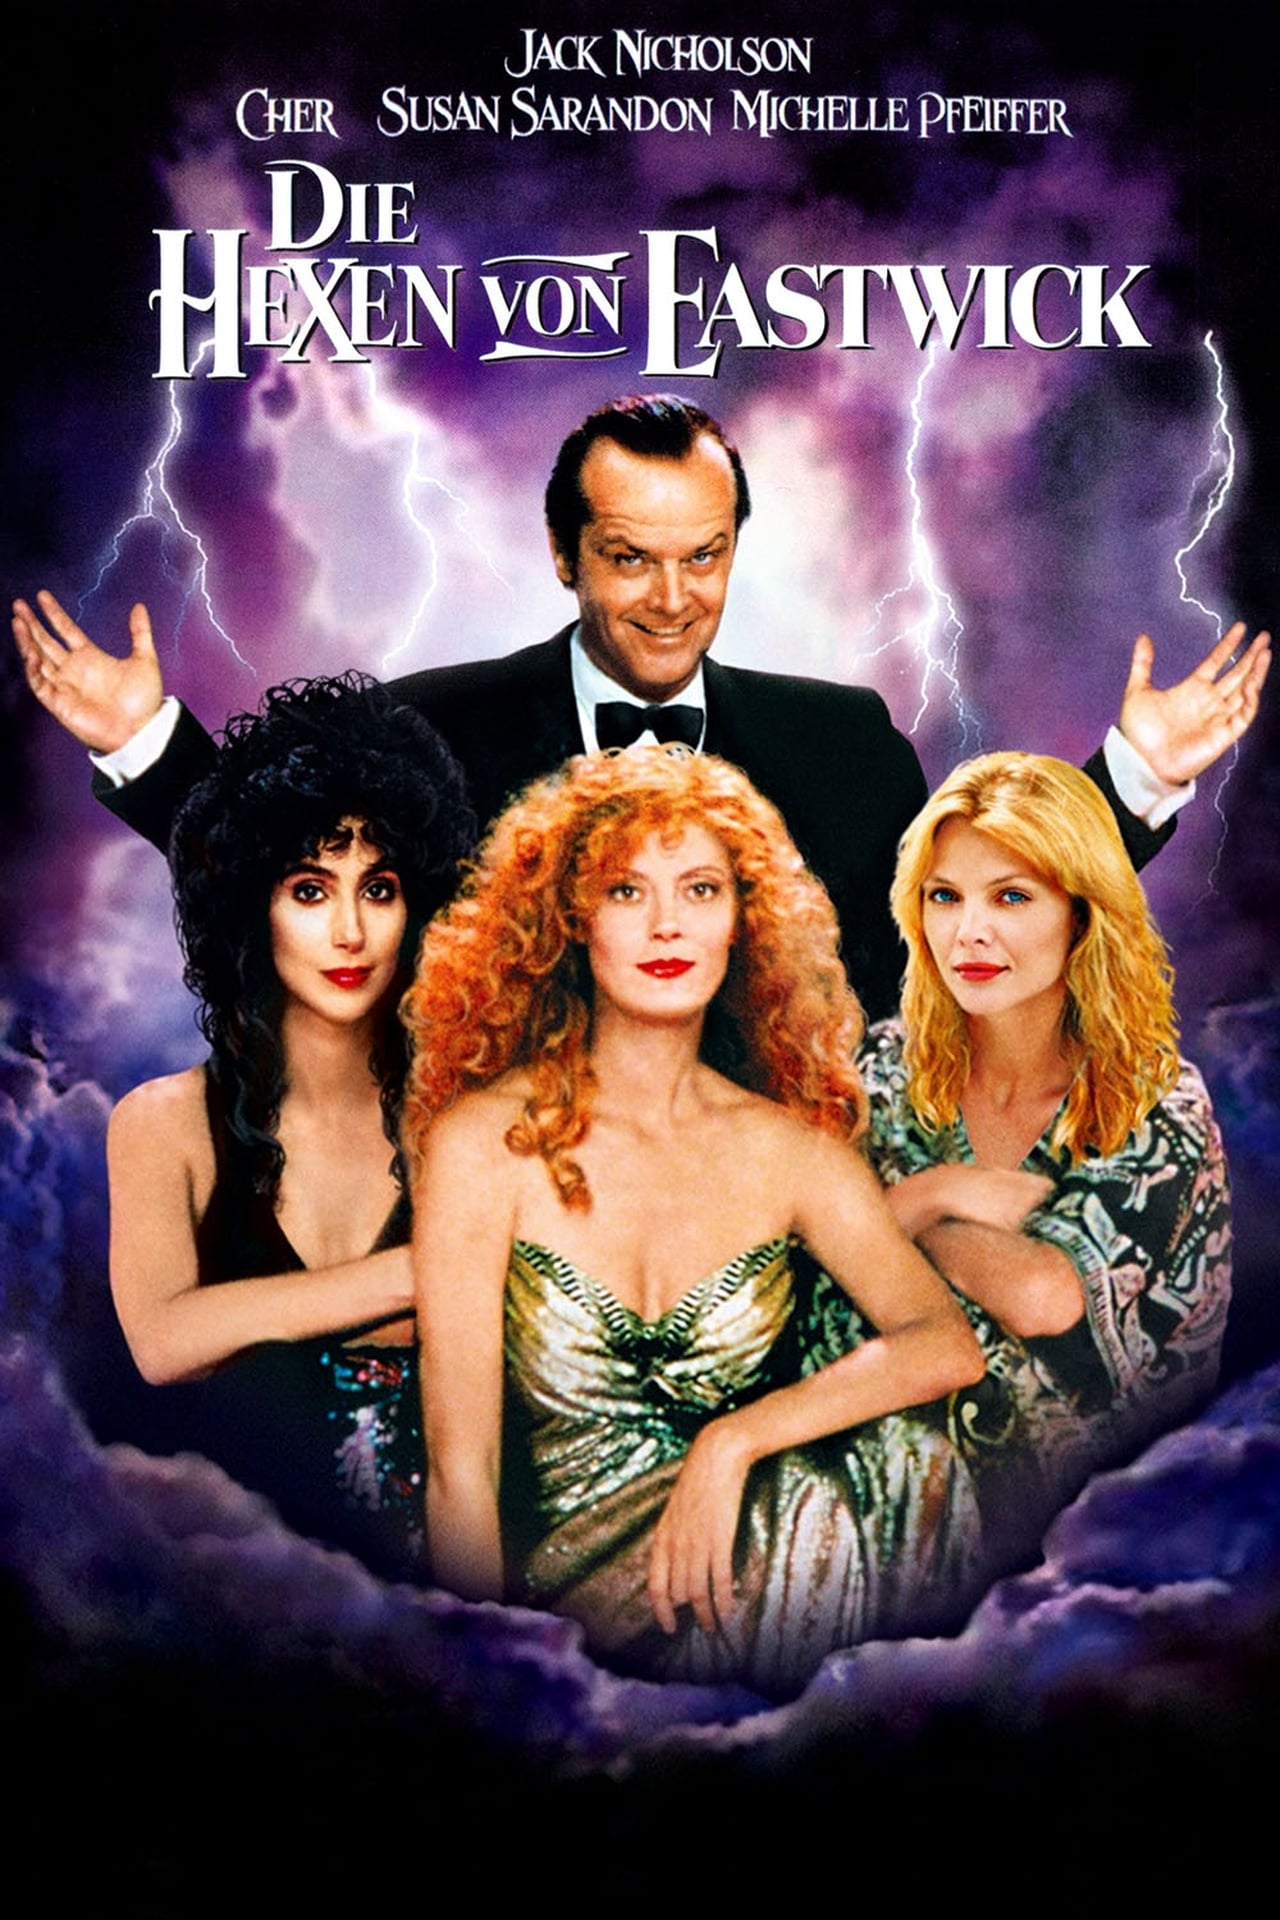 the witches of eastwick novel